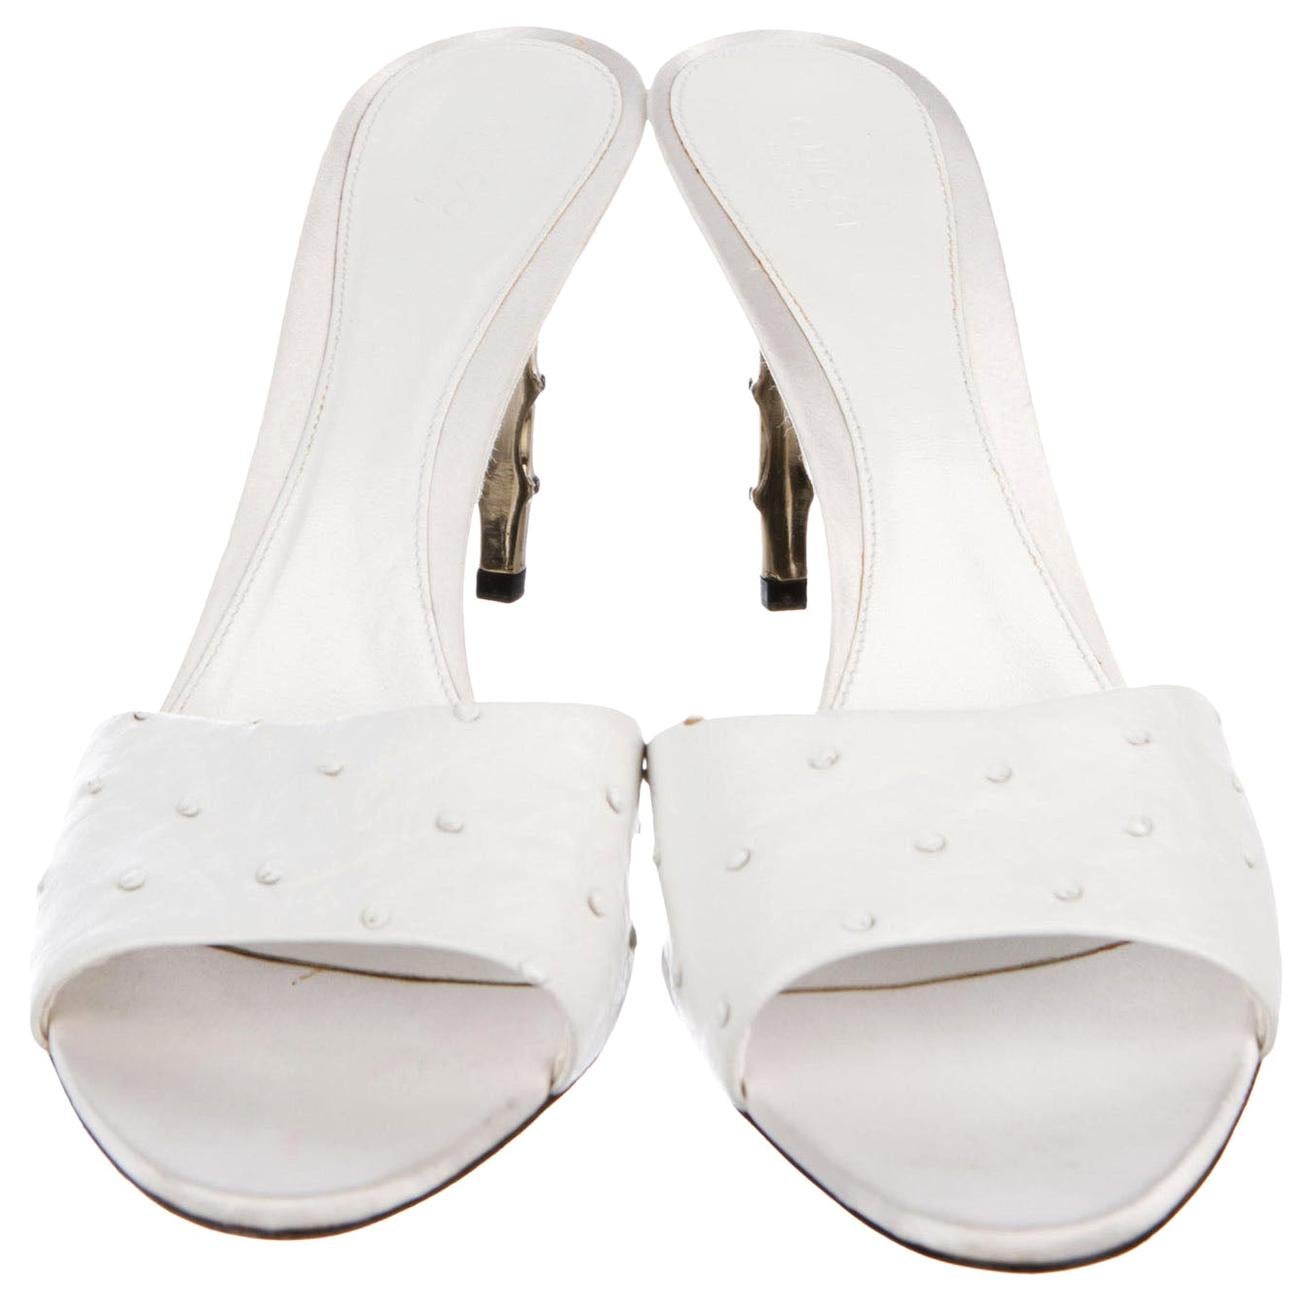 New Tom Ford for Gucci S/S 2004 White Ostrich Bamboo Shoes Sandals 10 B